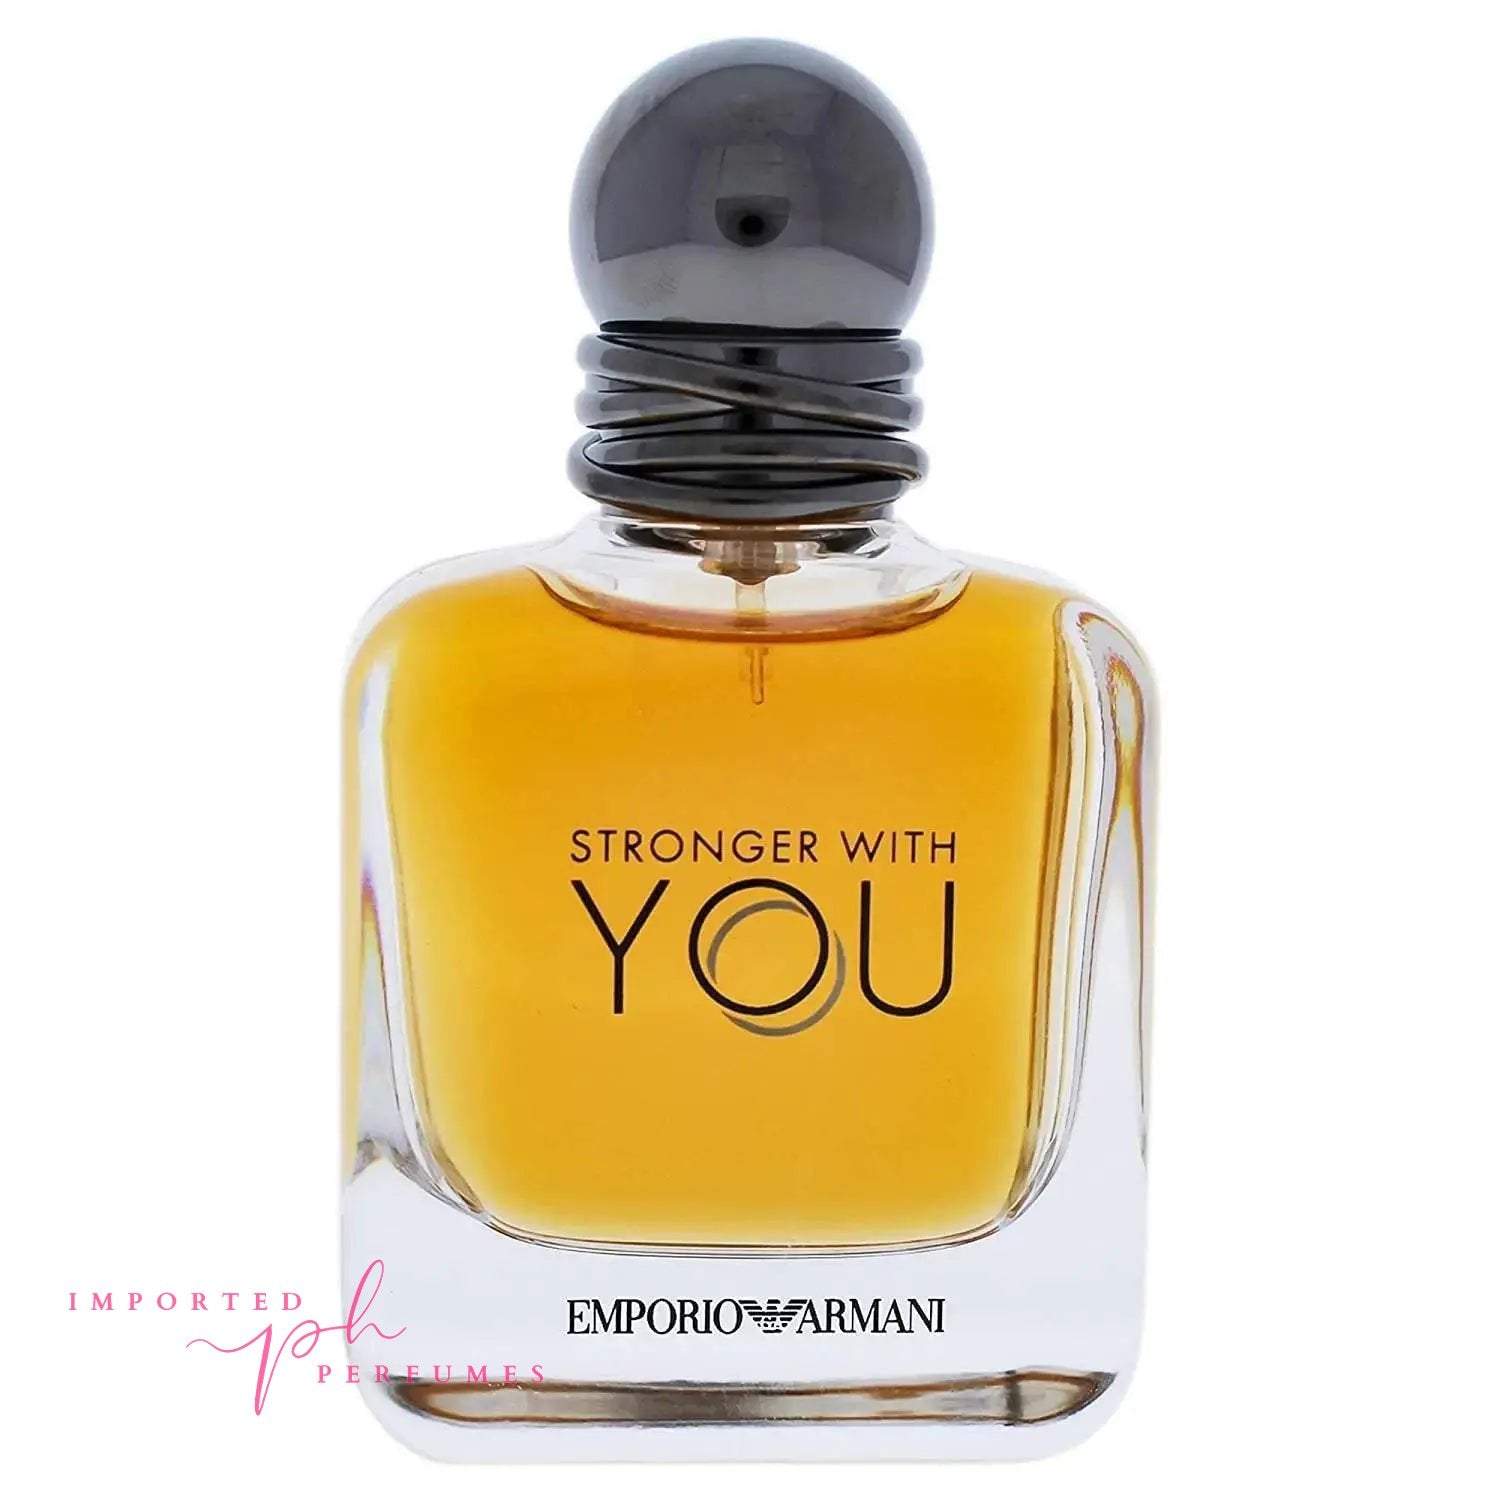 [TESTER] Emporio Armani Stronger With You EDT 100ml-Imported Perfumes Co-Emporio,Emporio Armani,Giogio Armani,Giorgio Armani,men,test,TESTER